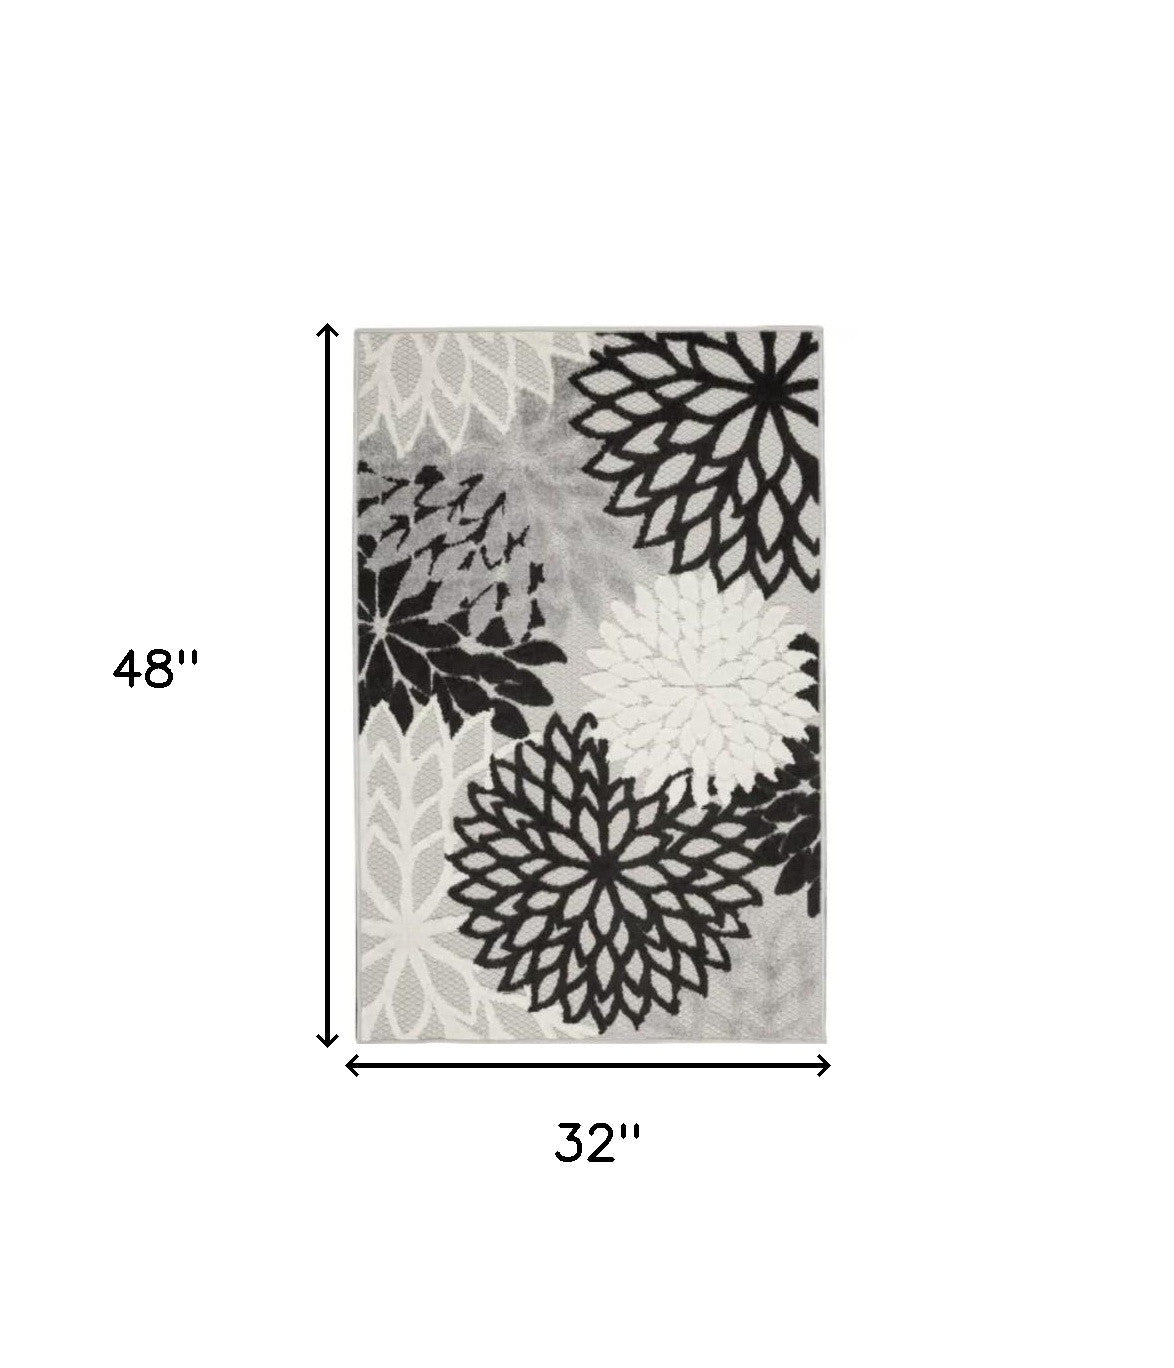 3' X 4' Black And White Floral Non Skid Indoor Outdoor Area Rug